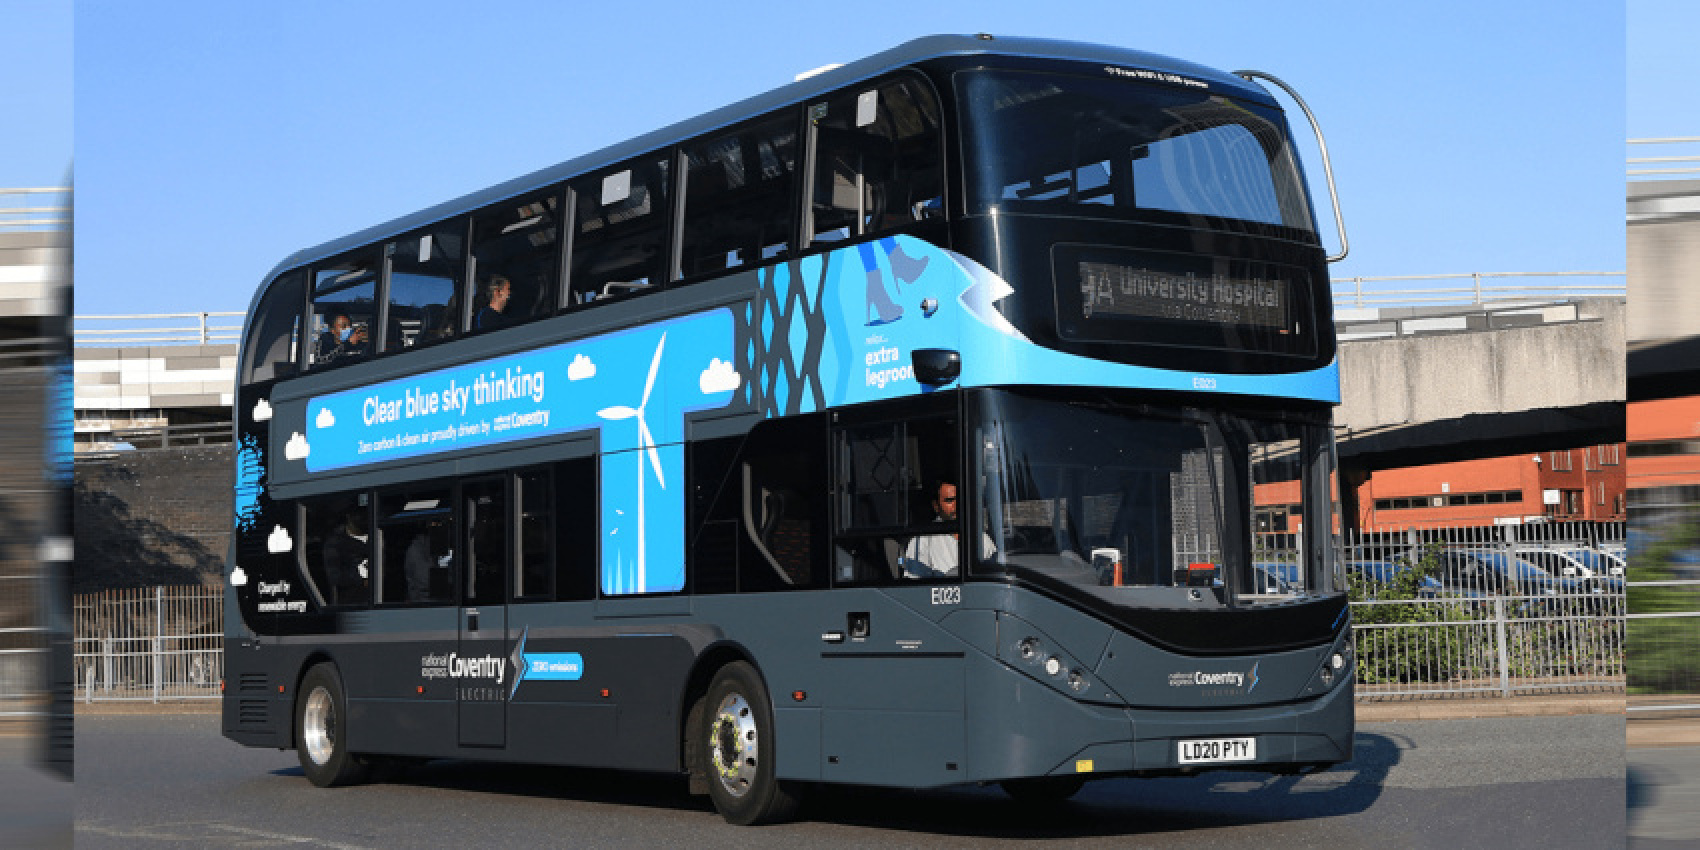 autos, byd, cars, electric vehicle, fleets, byd-adl, coventry, electric buses, enviro400ev, national express, public transport, zenobe energy, byd-adl to supply 130 electric buses for coventry